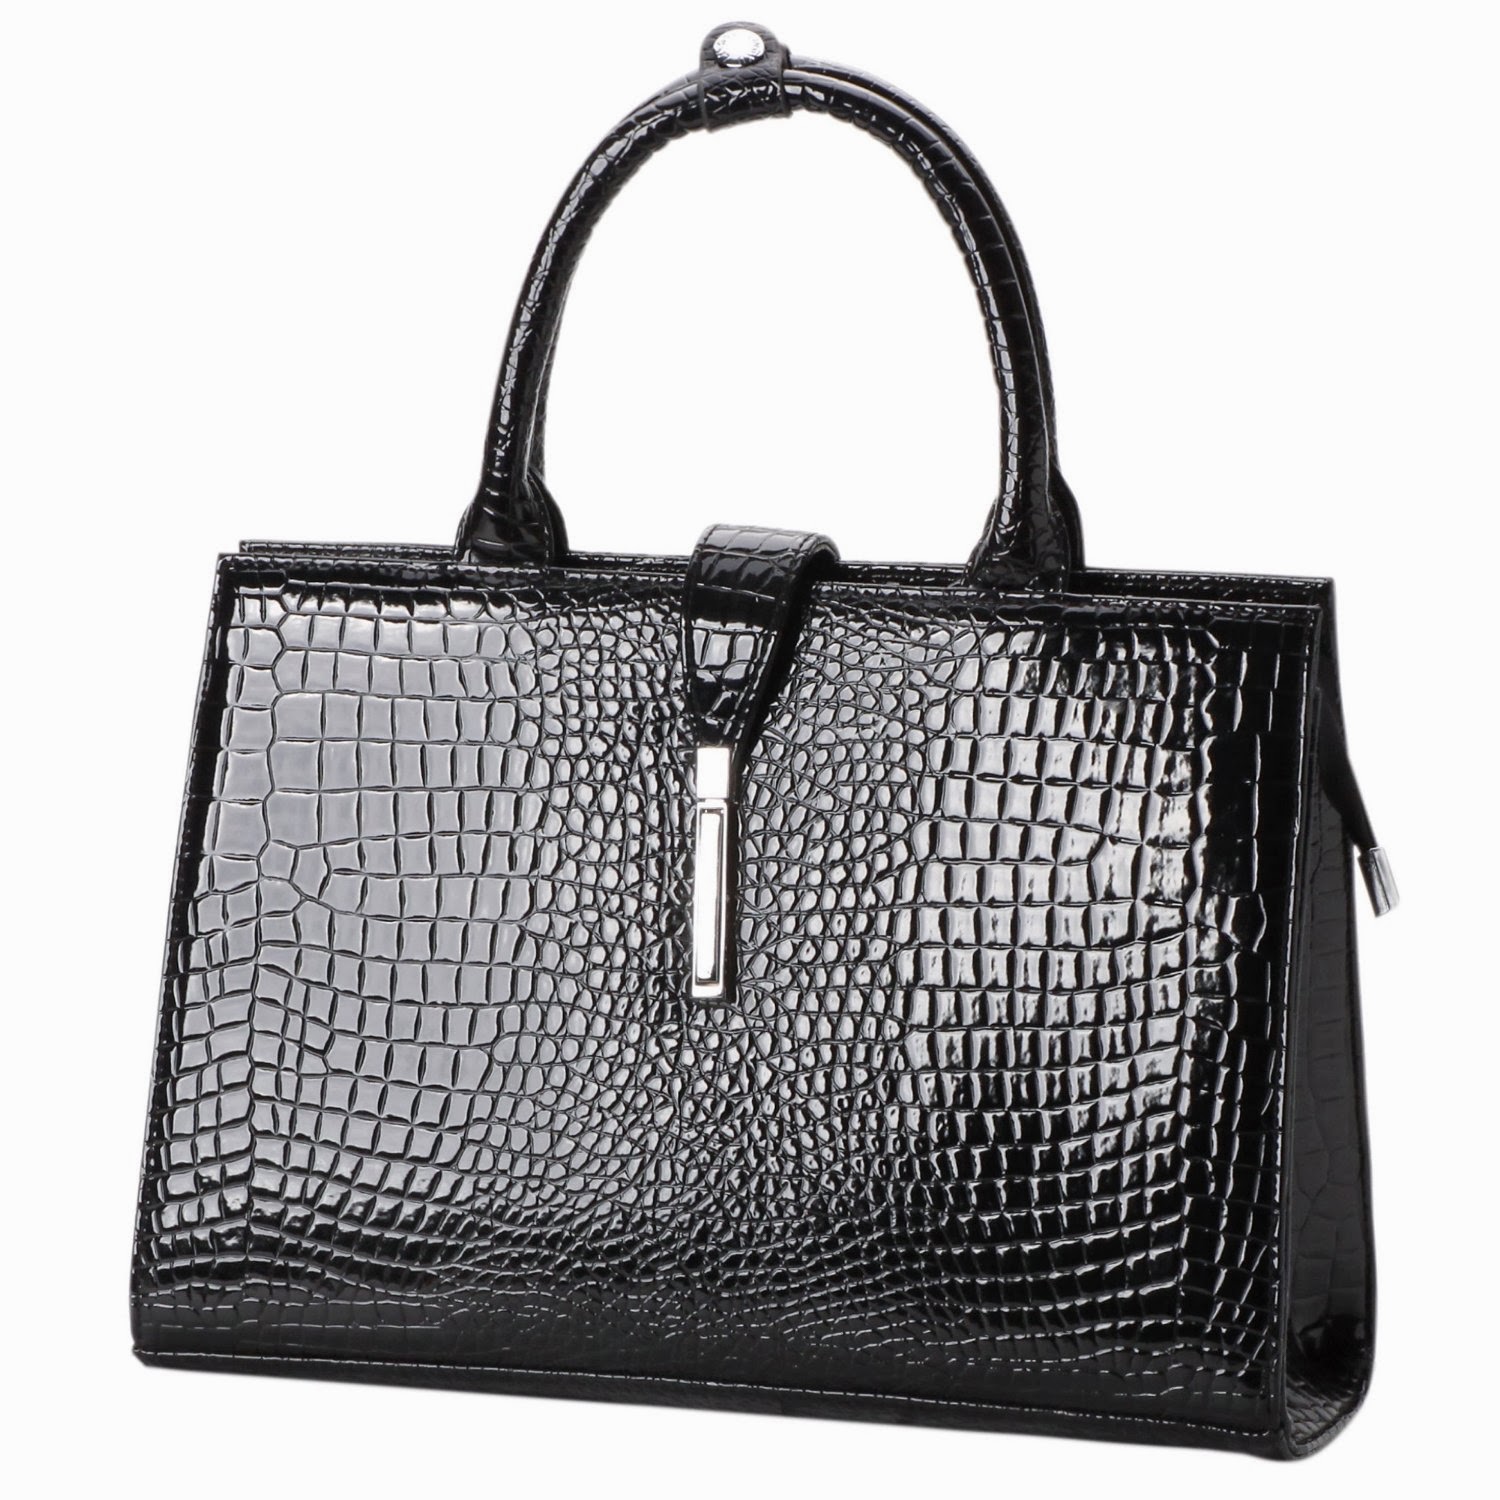 Patent Leather Handbags for a Sophisticated Look | All About Fashion